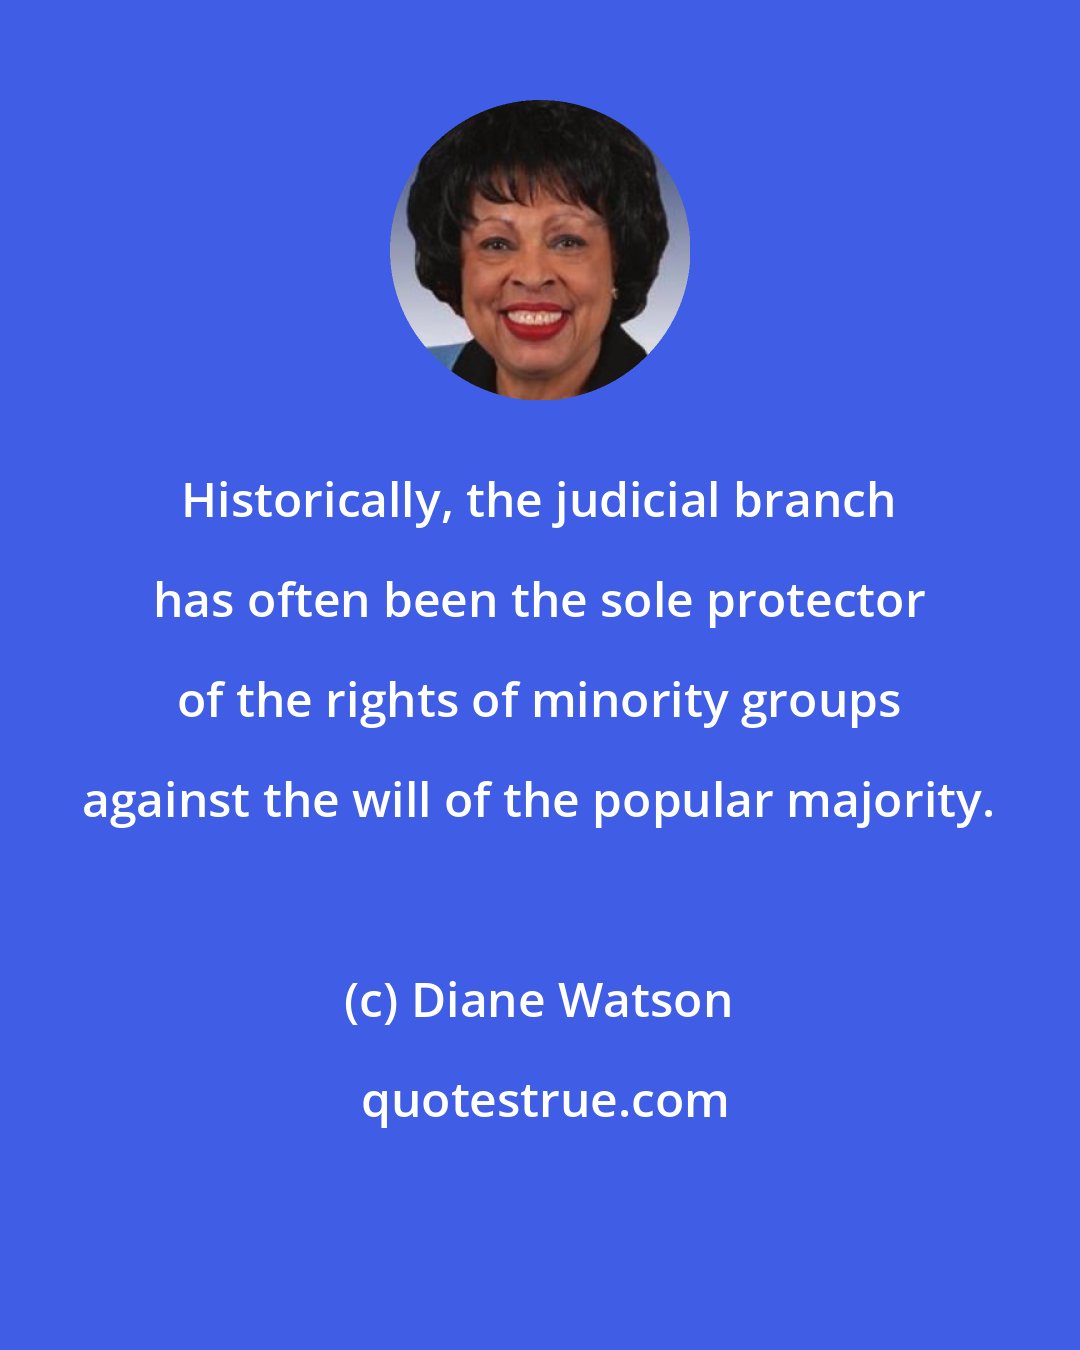 Diane Watson: Historically, the judicial branch has often been the sole protector of the rights of minority groups against the will of the popular majority.